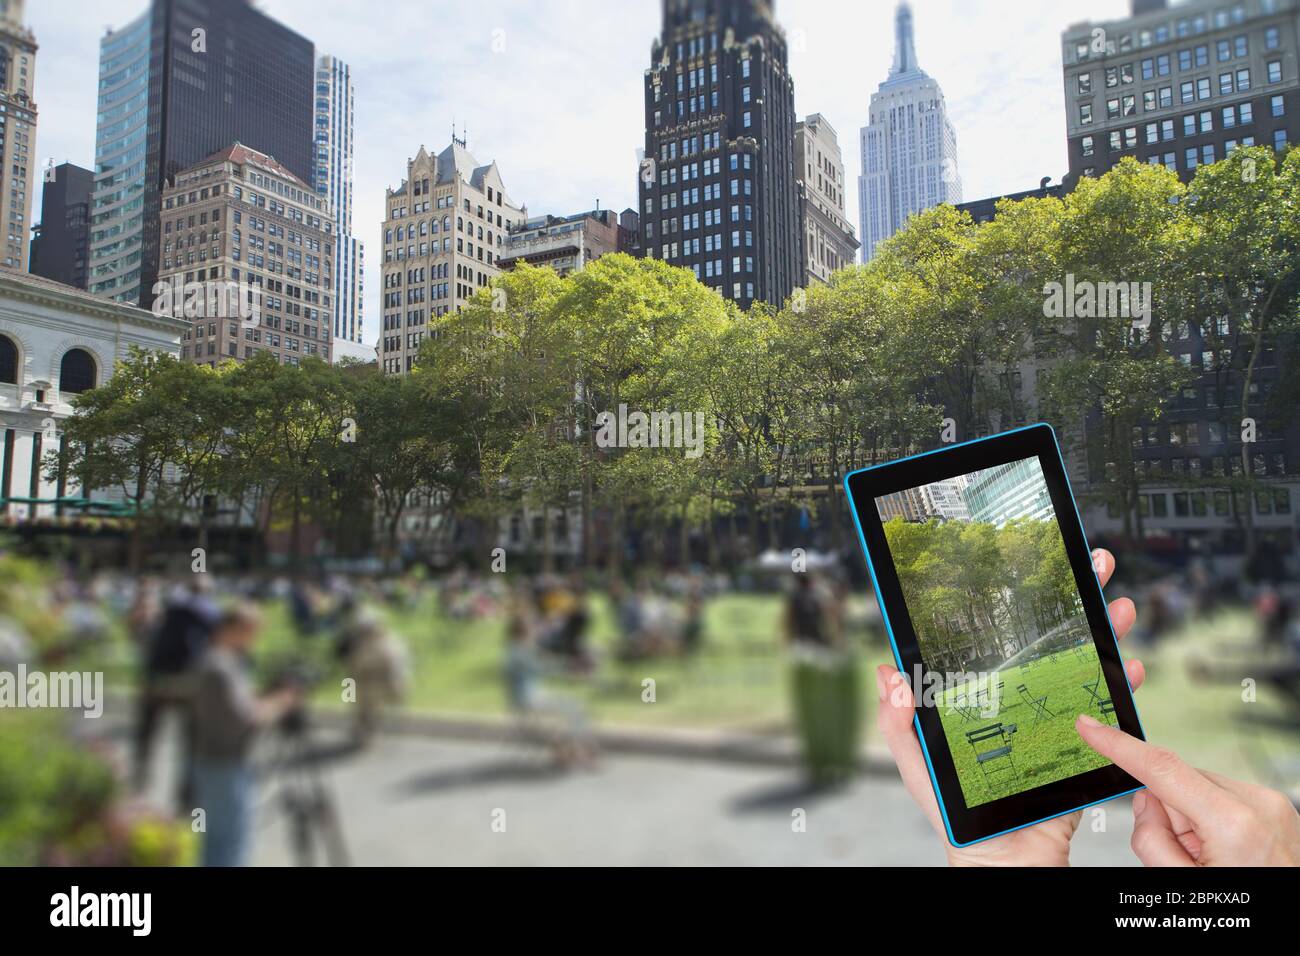 Female finger touching tablet with empty Bryant Park picture in the screen. Intentionally blurred image of a Bryant Park (NYC) is in the background. A Stock Photo